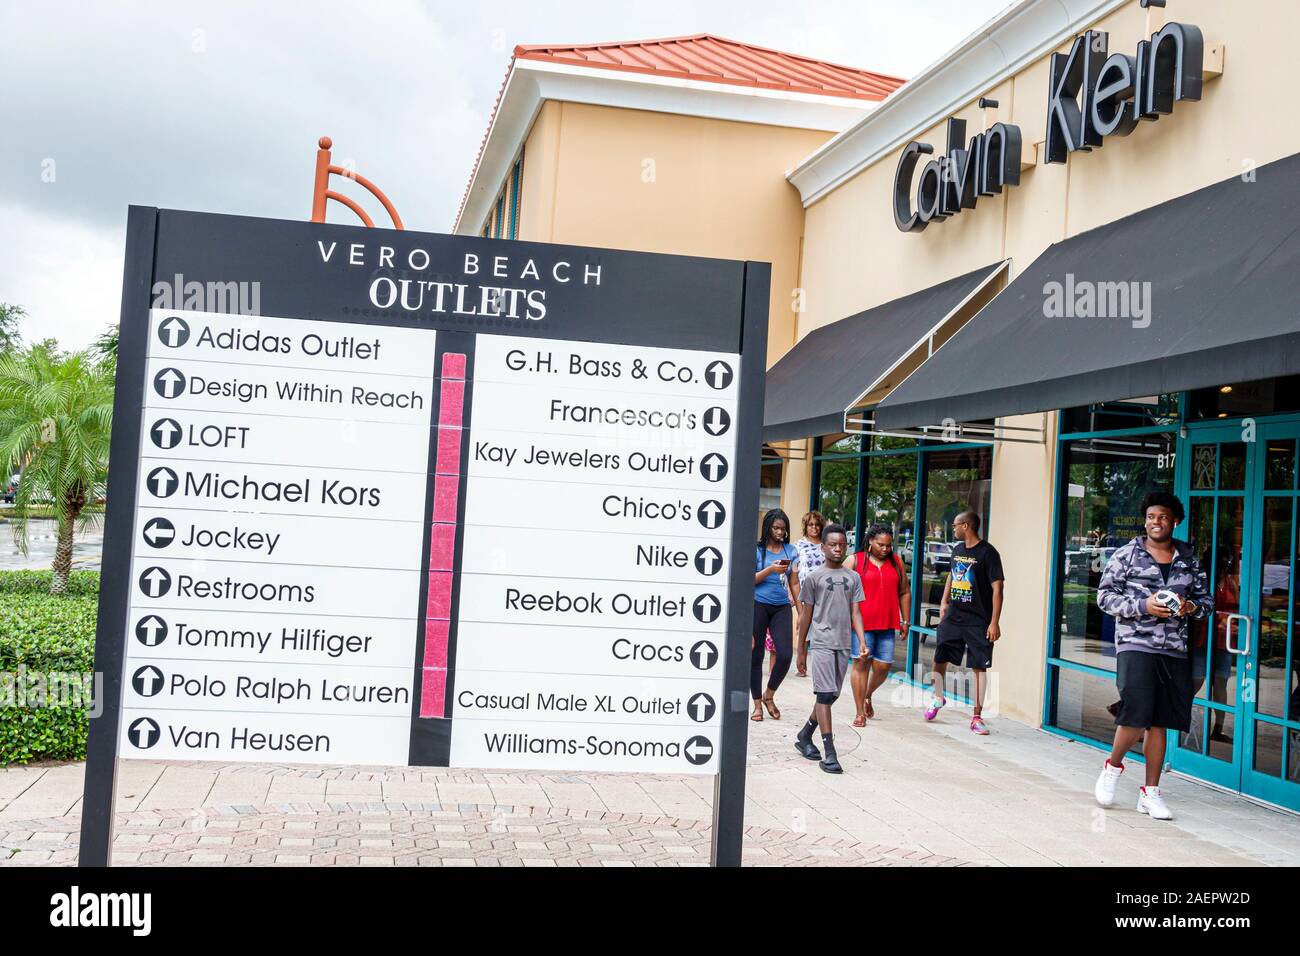 Vero beach outlets hi-res stock photography and images - Alamy